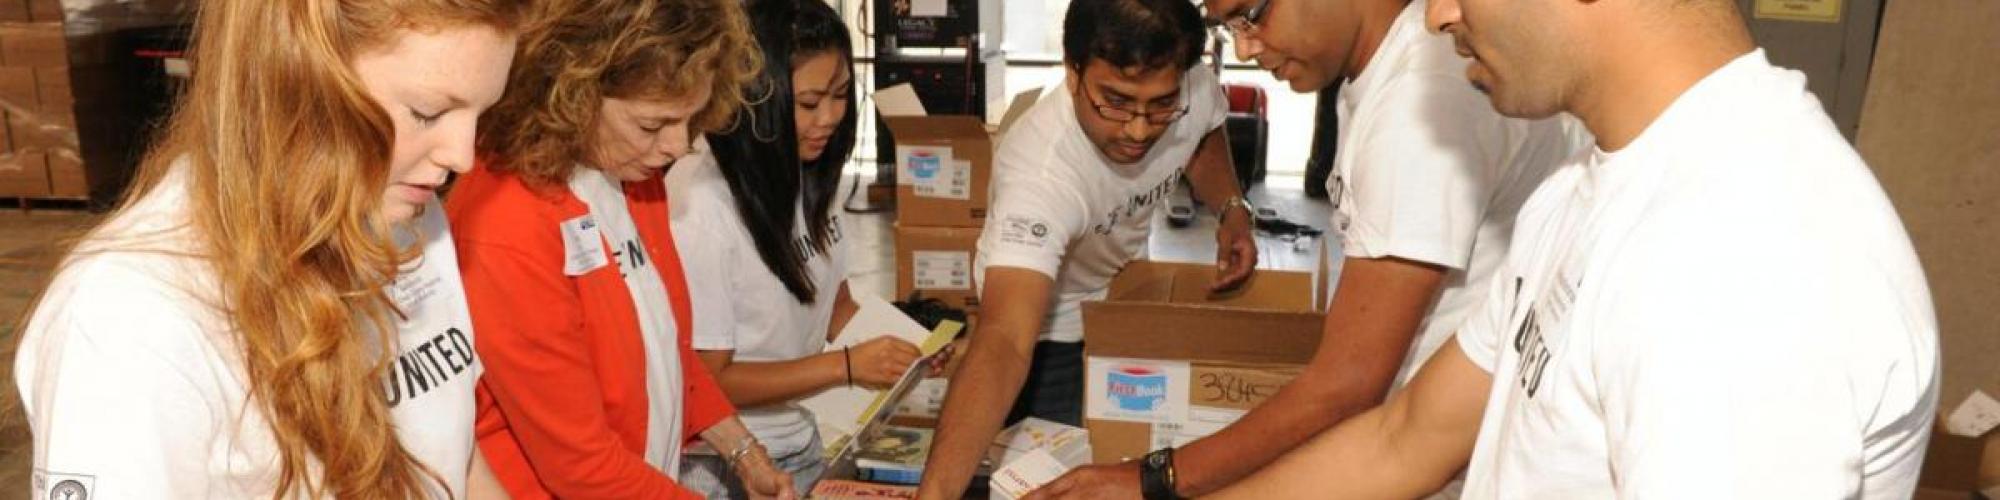 volunteers wear LIVE UNITED tshirts on eaither side of a table sorting books